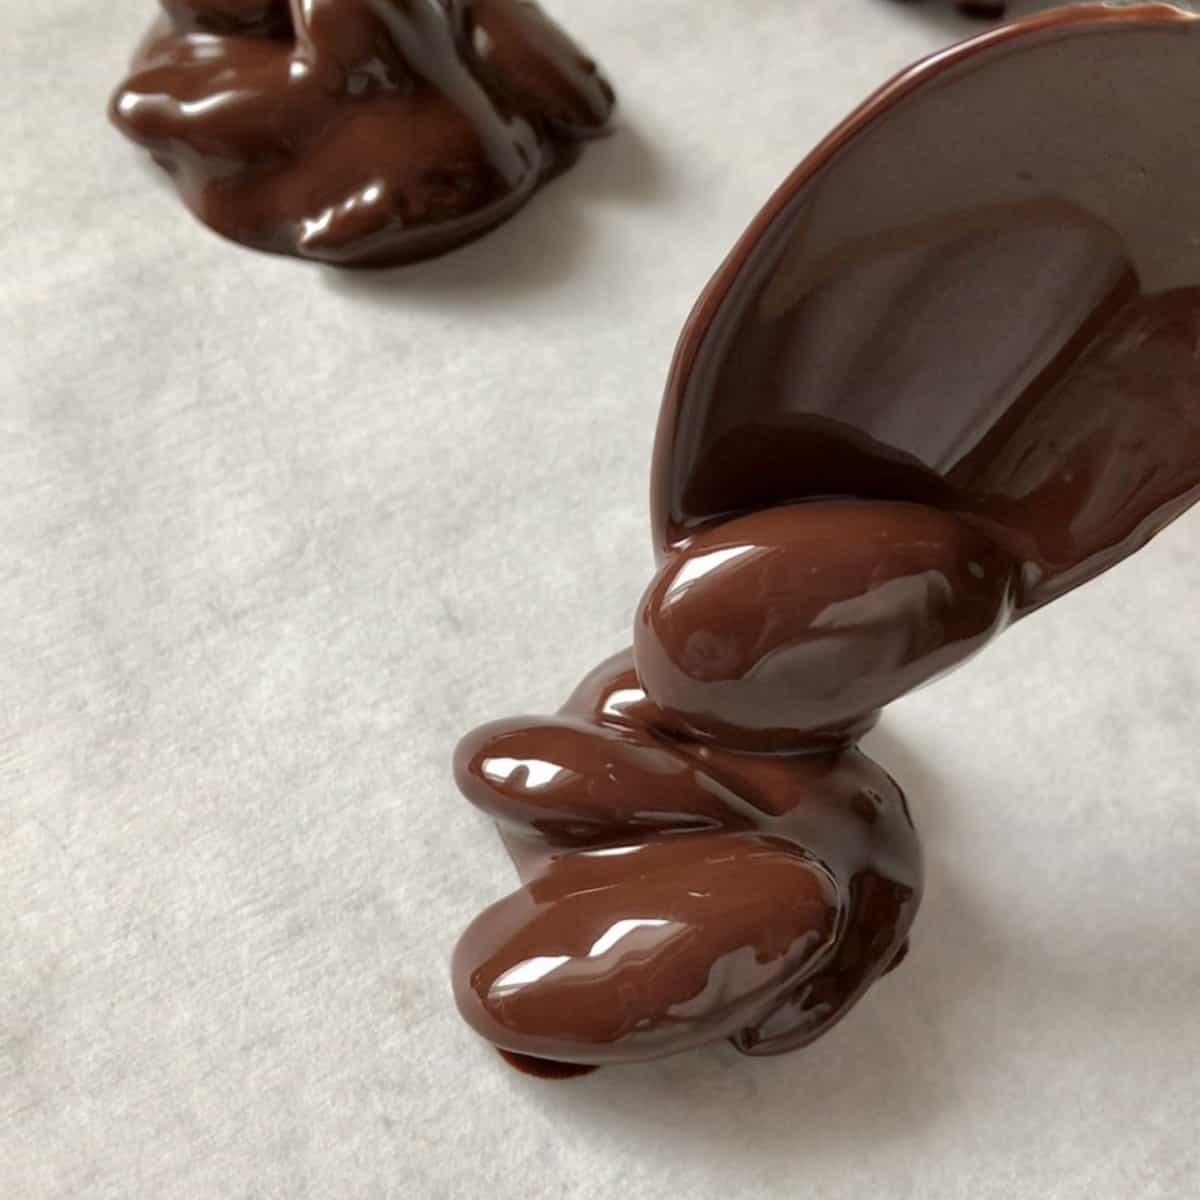 Choclate covered almonds being dropped on parchment paper. 